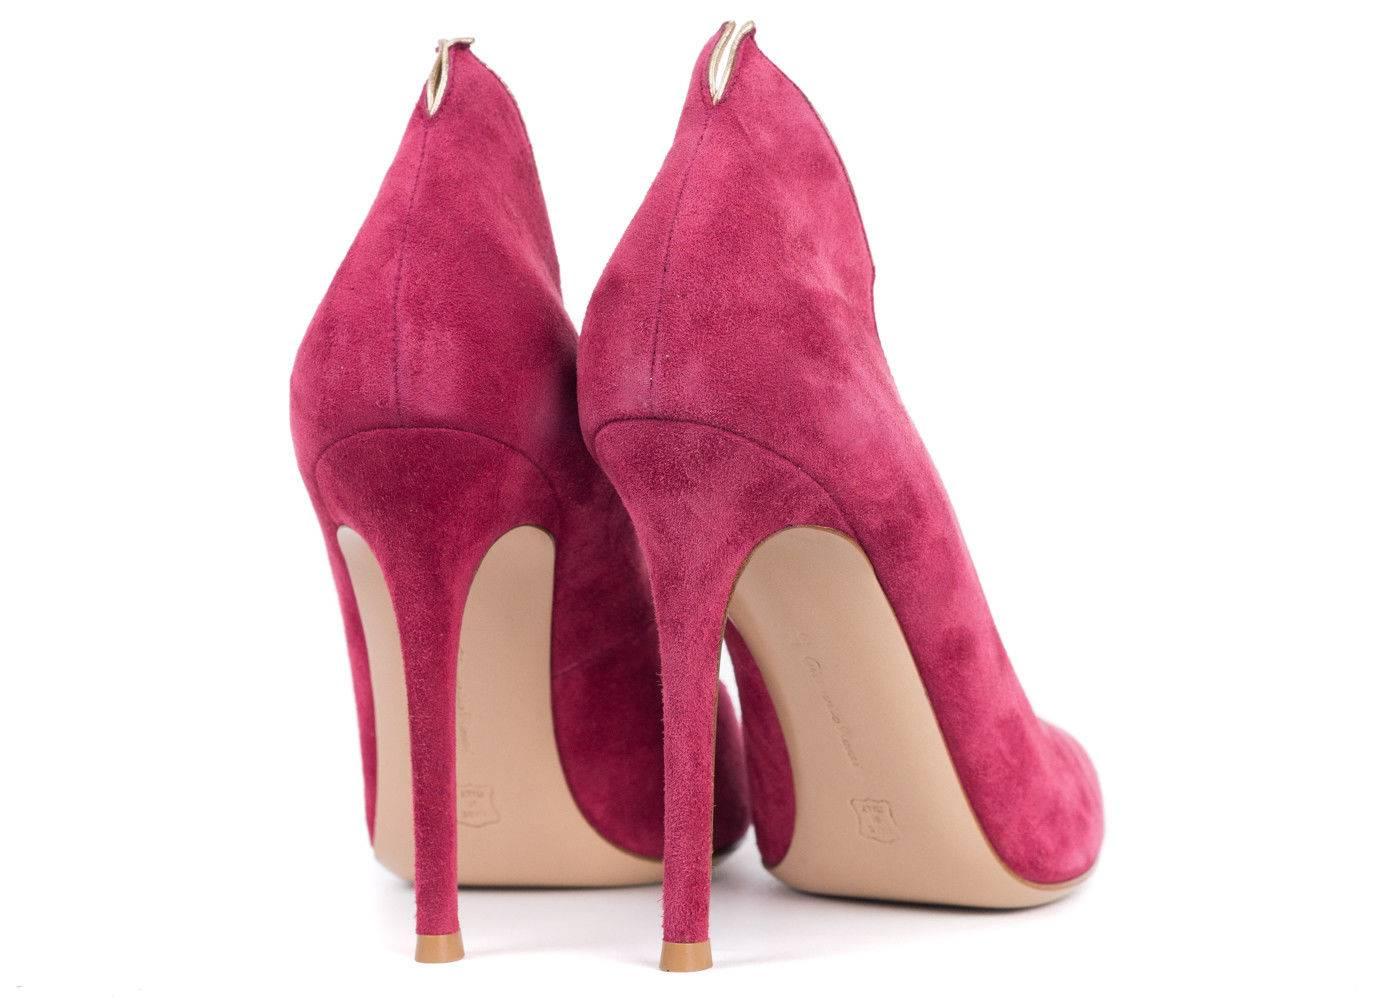 Introduce the High Back Heel from Gianvito Rossi's into your wardrobe. This pink suede pump features, light gold trim, a slightly split heel count, and a four inch heel. You can pair these heels with an all white skinny trousers and a fluid blouse